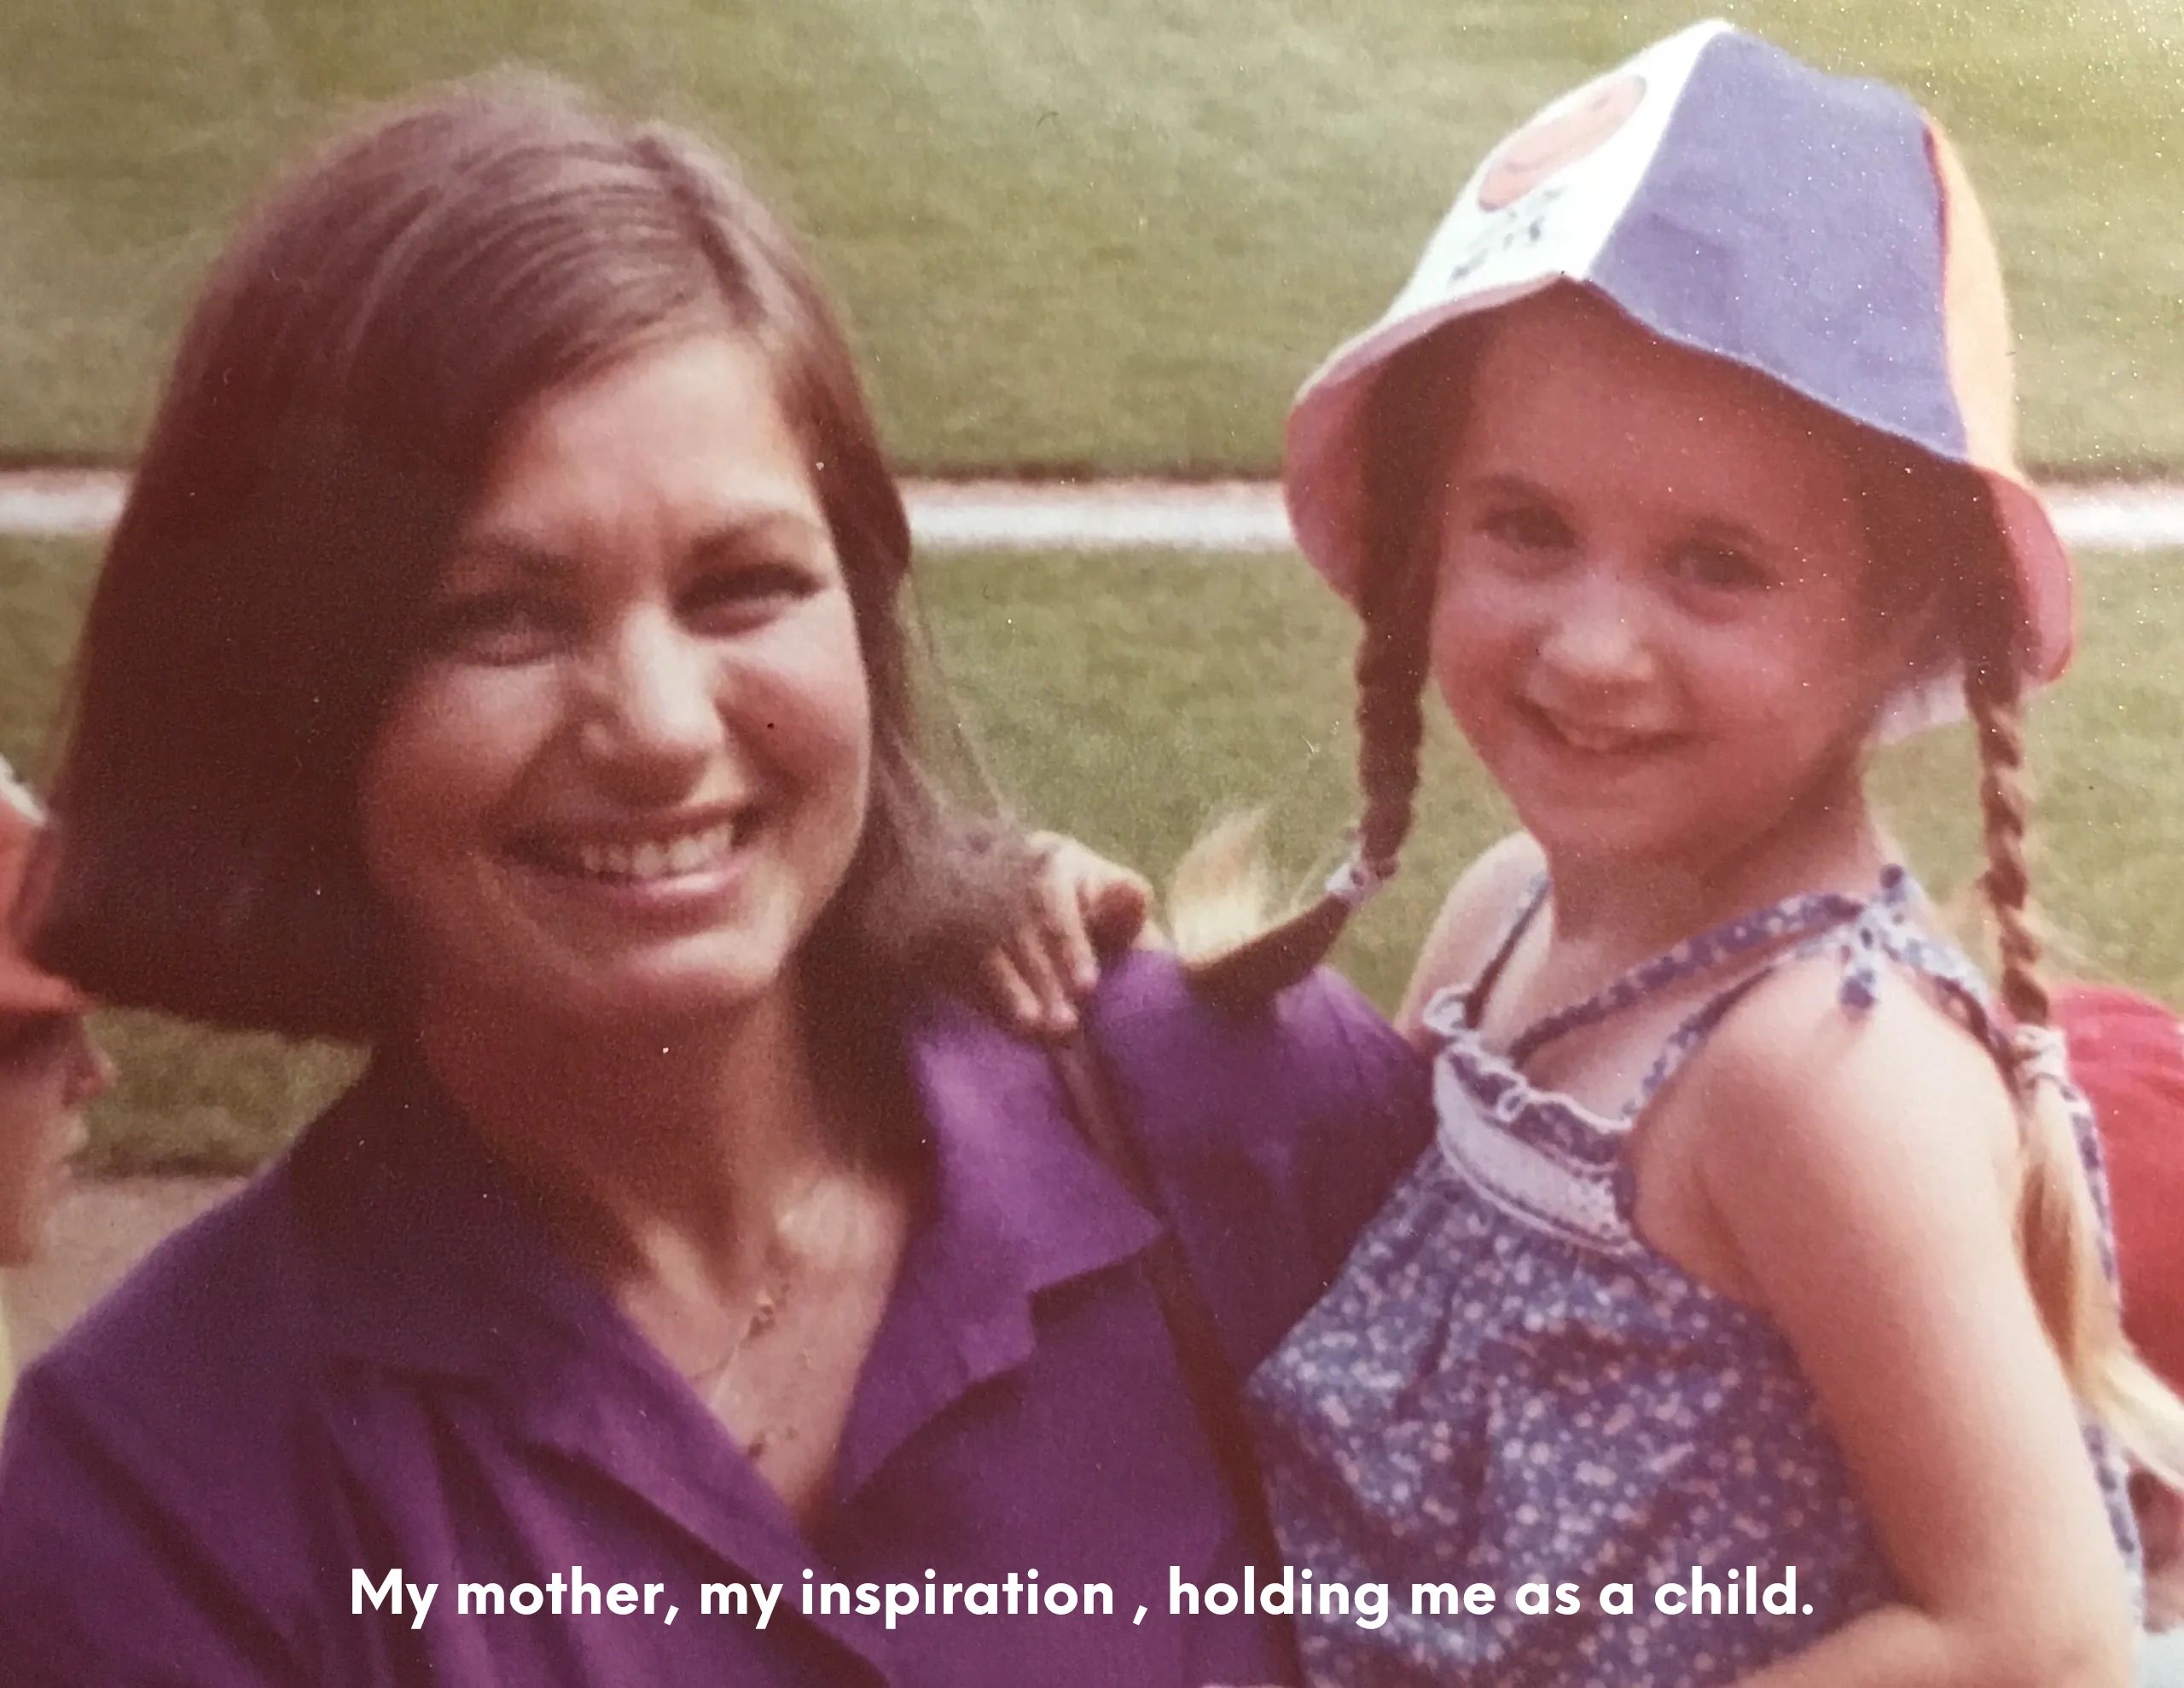 My Mother, my inspiration, with me as a child.